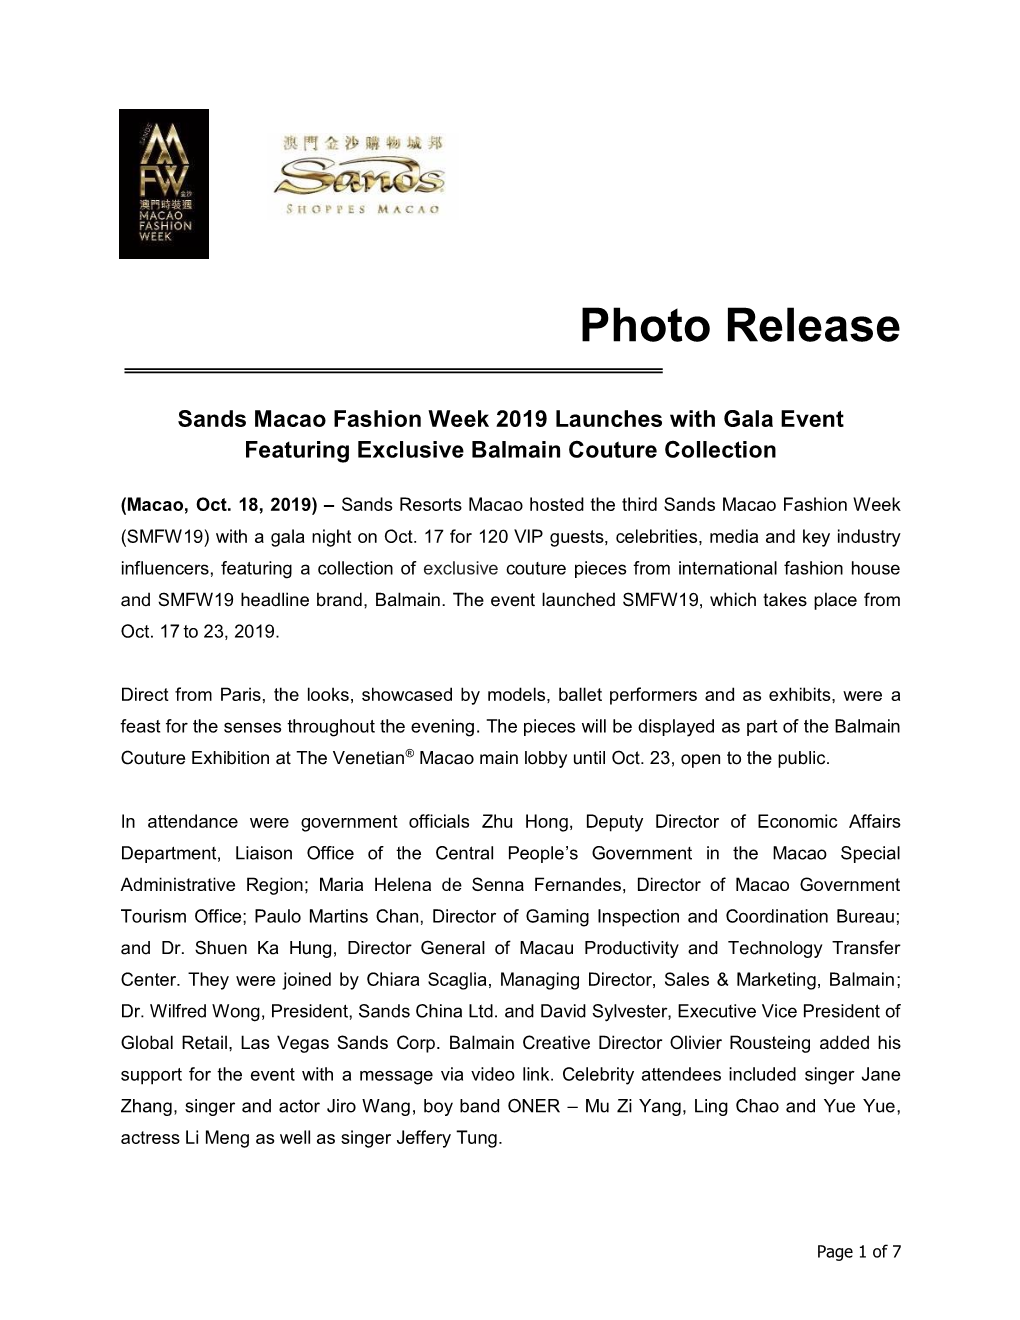 Sands Macao Fashion Week 2019 Launches with Gala Event Featuring Exclusive Balmain Couture Collection